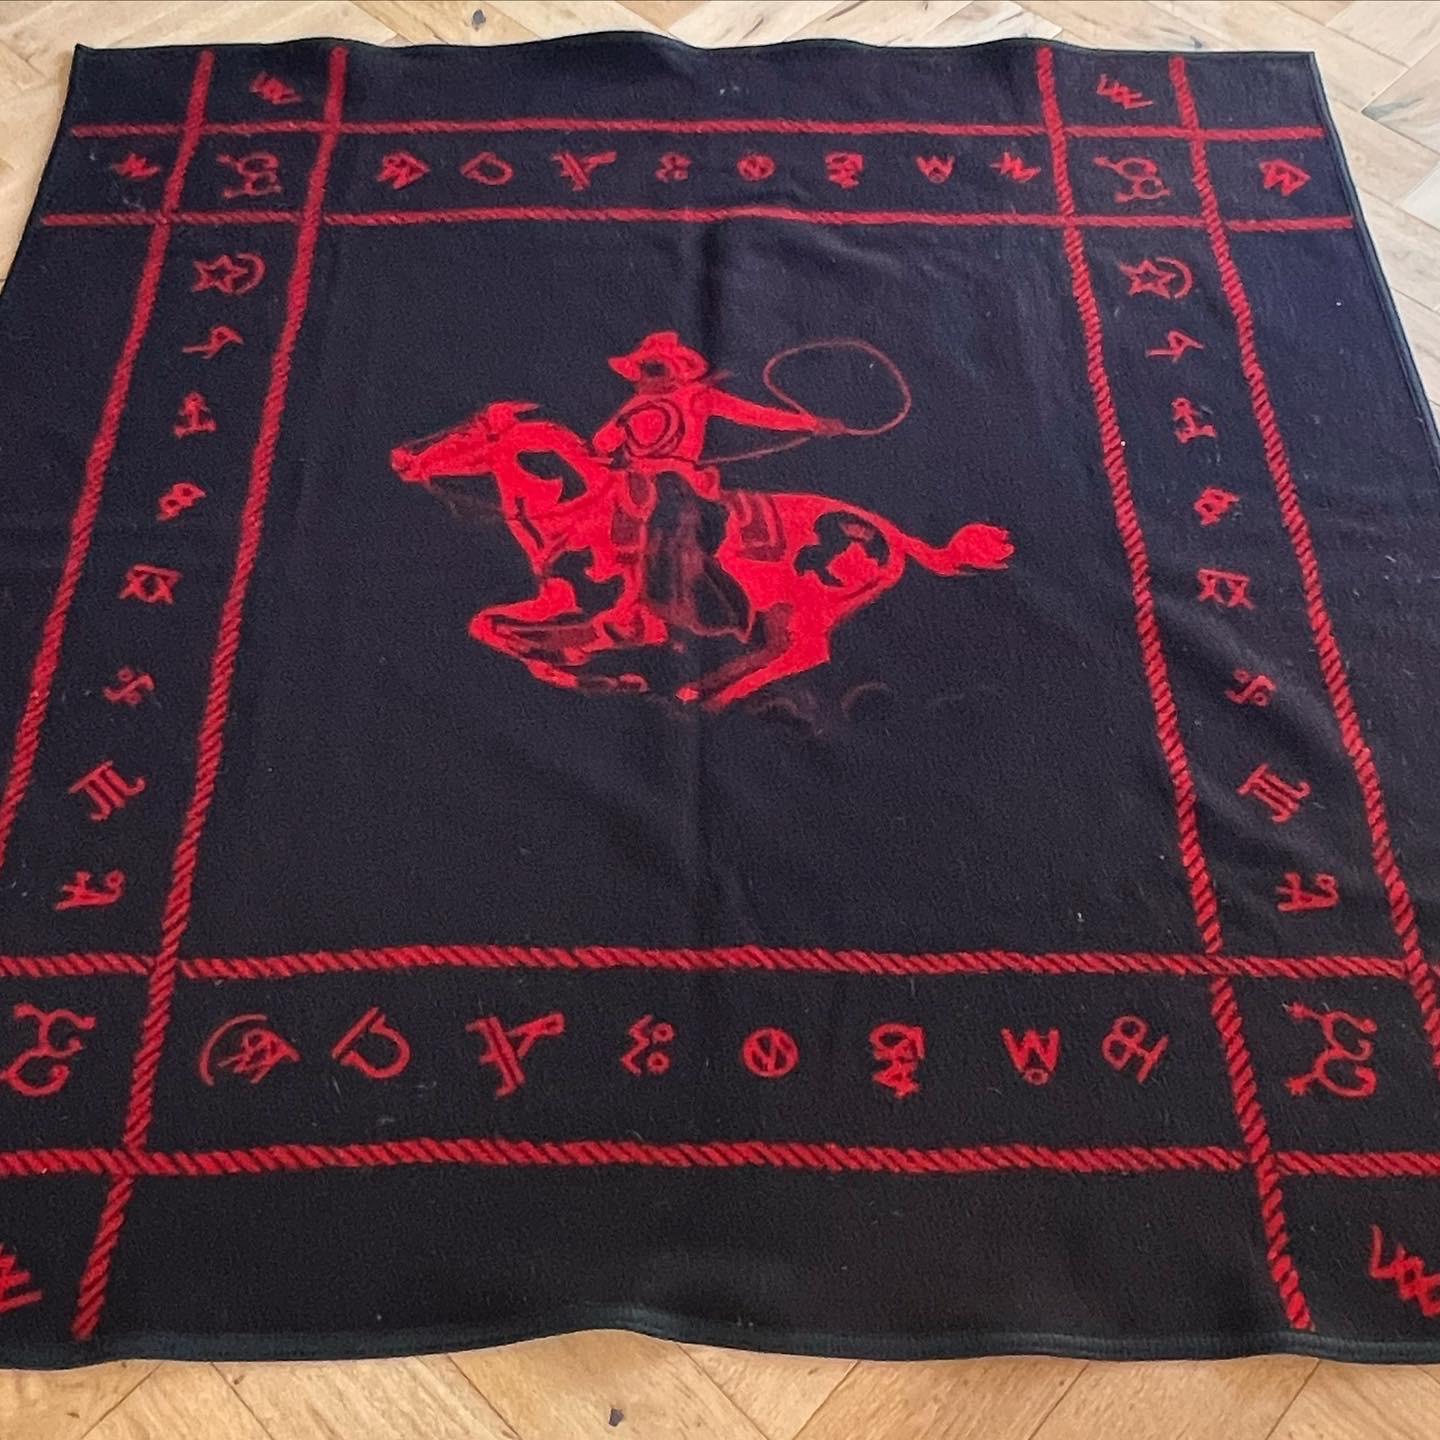 REVERSE COWBOY: a reversible black and red cowboy throw by Westland of Pendleton, made in Oregon late 1950s. Fab condition with minor signs of age. Pick up in central west Los Angeles or we ship worldwide.
60” x 60” 